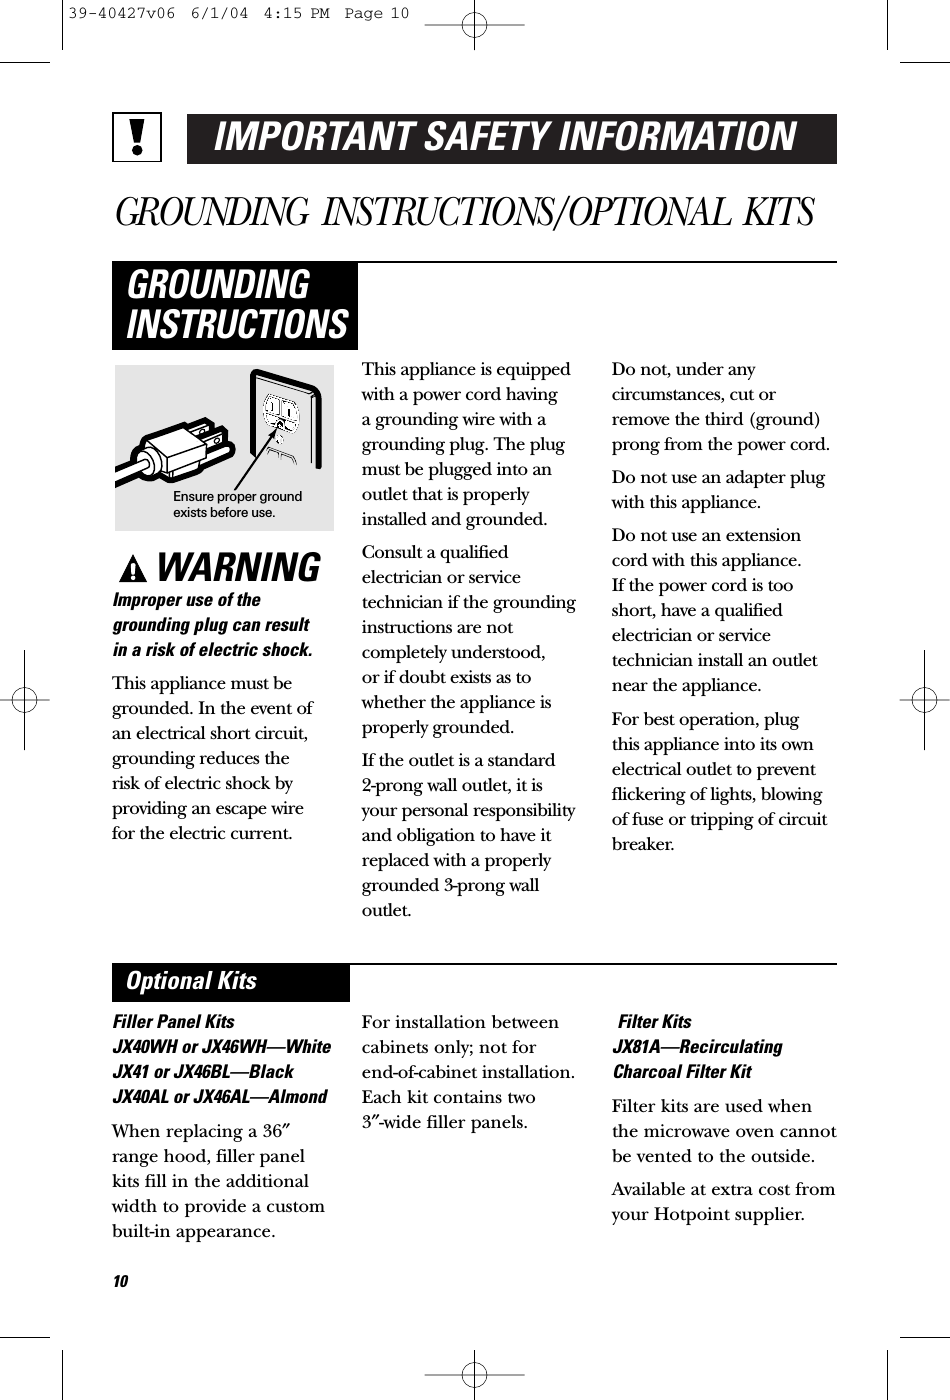 IMPORTANT SAFETY INFORMATIONGROUNDING INSTRUCTIONS/OPTIONAL KITSWARNINGImproper use of thegrounding plug can result in a risk of electric shock.This appliance must begrounded. In the event of an electrical short circuit,grounding reduces the risk of electric shock byproviding an escape wire for the electric current. This appliance is equippedwith a power cord having a grounding wire with agrounding plug. The plugmust be plugged into anoutlet that is properlyinstalled and grounded.Consult a qualified electrician or servicetechnician if the groundinginstructions are notcompletely understood, or if doubt exists as towhether the appliance isproperly grounded.If the outlet is a standard 2-prong wall outlet, it is your personal responsibilityand obligation to have itreplaced with a properlygrounded 3-prong walloutlet.Do not, under anycircumstances, cut orremove the third (ground)prong from the power cord.Do not use an adapter plugwith this appliance.Do not use an extensioncord with this appliance. If the power cord is tooshort, have a qualifiedelectrician or servicetechnician install an outletnear the appliance.For best operation, plug this appliance into its ownelectrical outlet to preventflickering of lights, blowingof fuse or tripping of circuitbreaker.GROUNDINGINSTRUCTIONSFiller Panel KitsJX40WH or JX46WH—WhiteJX41 or JX46BL—BlackJX40AL or JX46AL—AlmondWhen replacing a 36″range hood, filler panelkits fill in the additionalwidth to provide a custombuilt-in appearance. For installation betweencabinets only; not for end-of-cabinet installation.Each kit contains two 3″-wide filler panels.Filter KitsJX81A—RecirculatingCharcoal Filter KitFilter kits are used whenthe microwave oven cannotbe vented to the outside.Available at extra cost fromyour Hotpoint supplier.Optional KitsEnsure proper groundexists before use.1039-40427v06  6/1/04  4:15 PM  Page 10